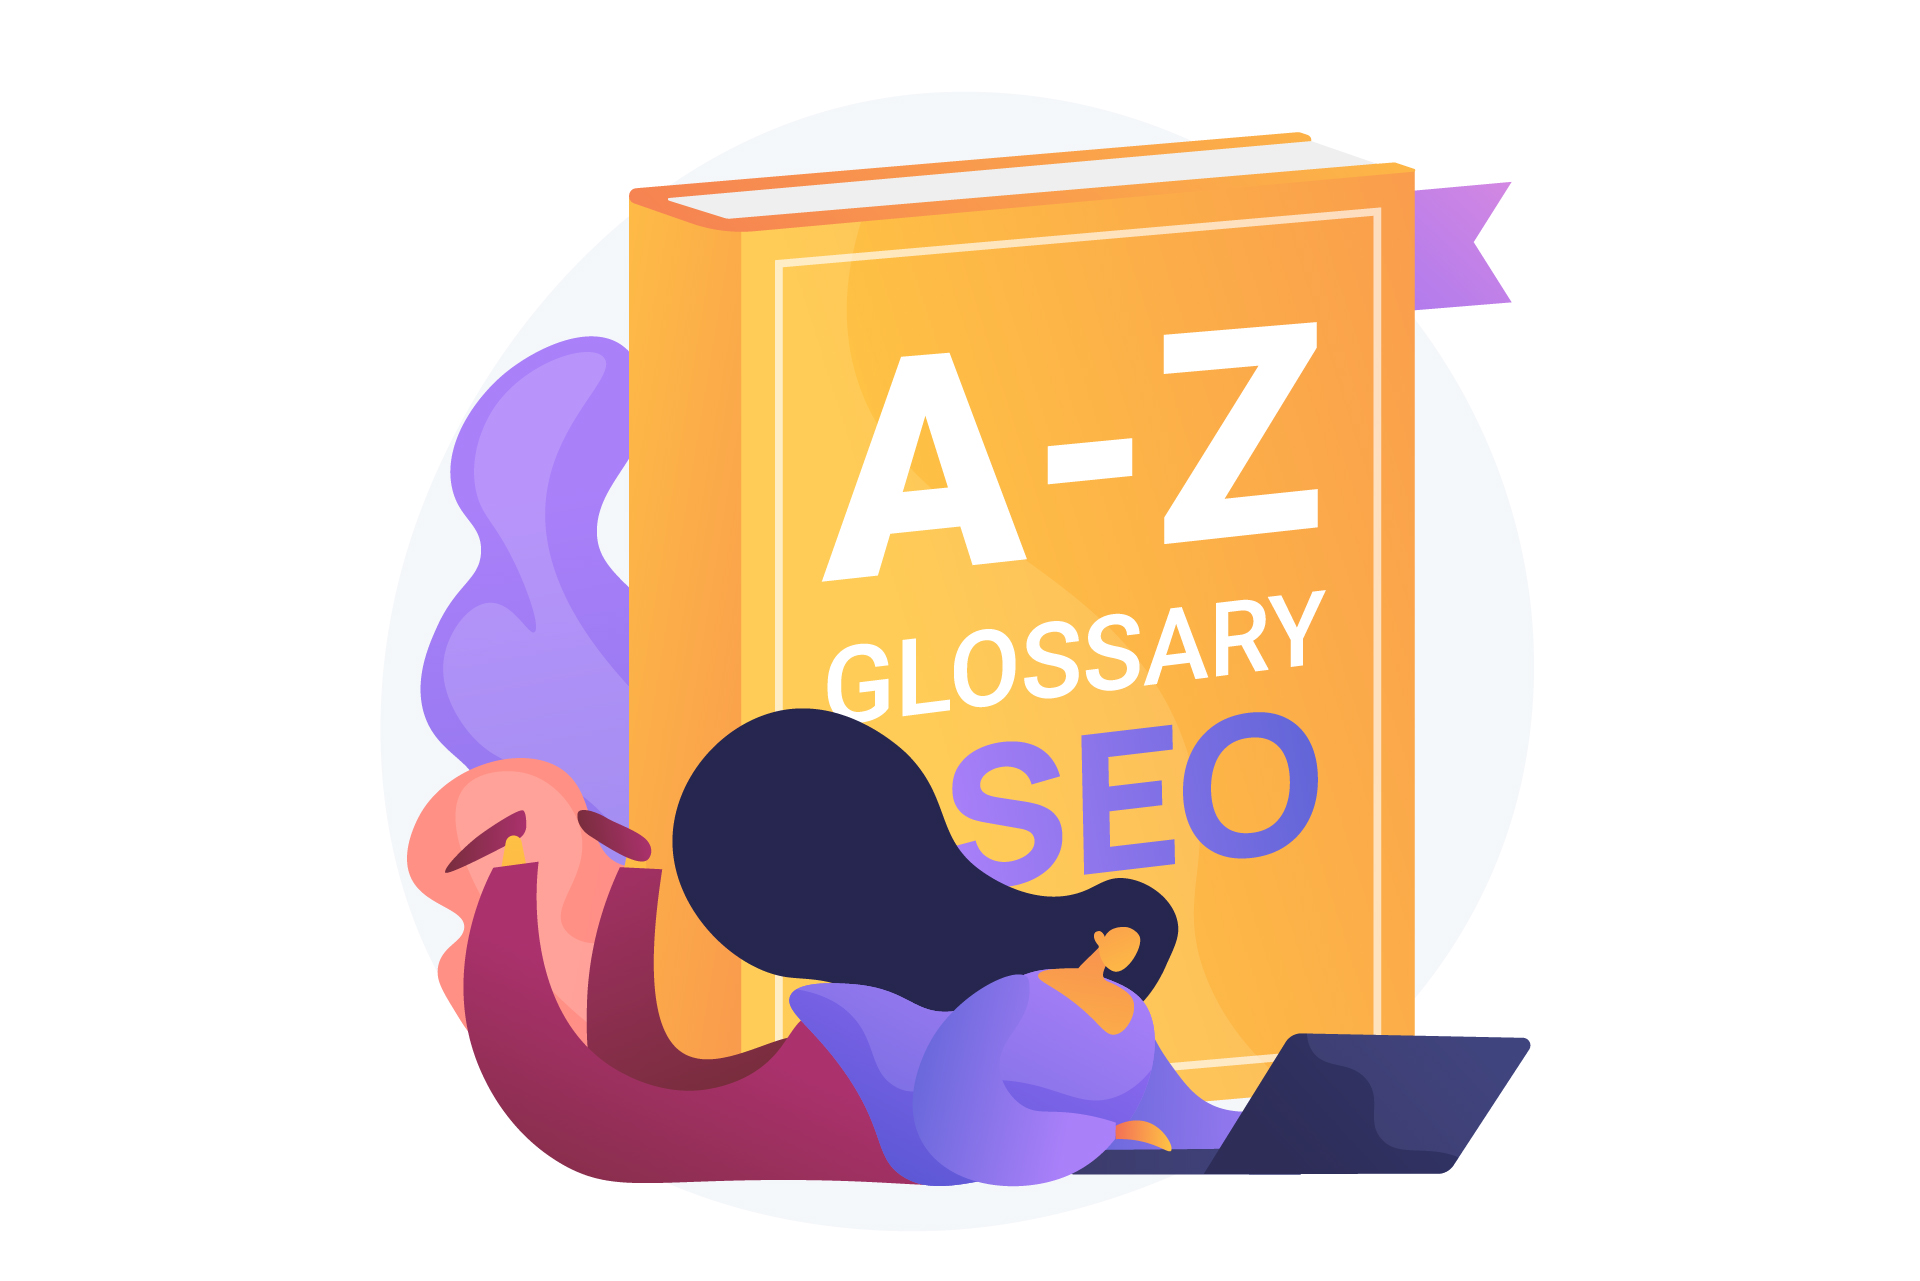 The glossary of SEO strategy